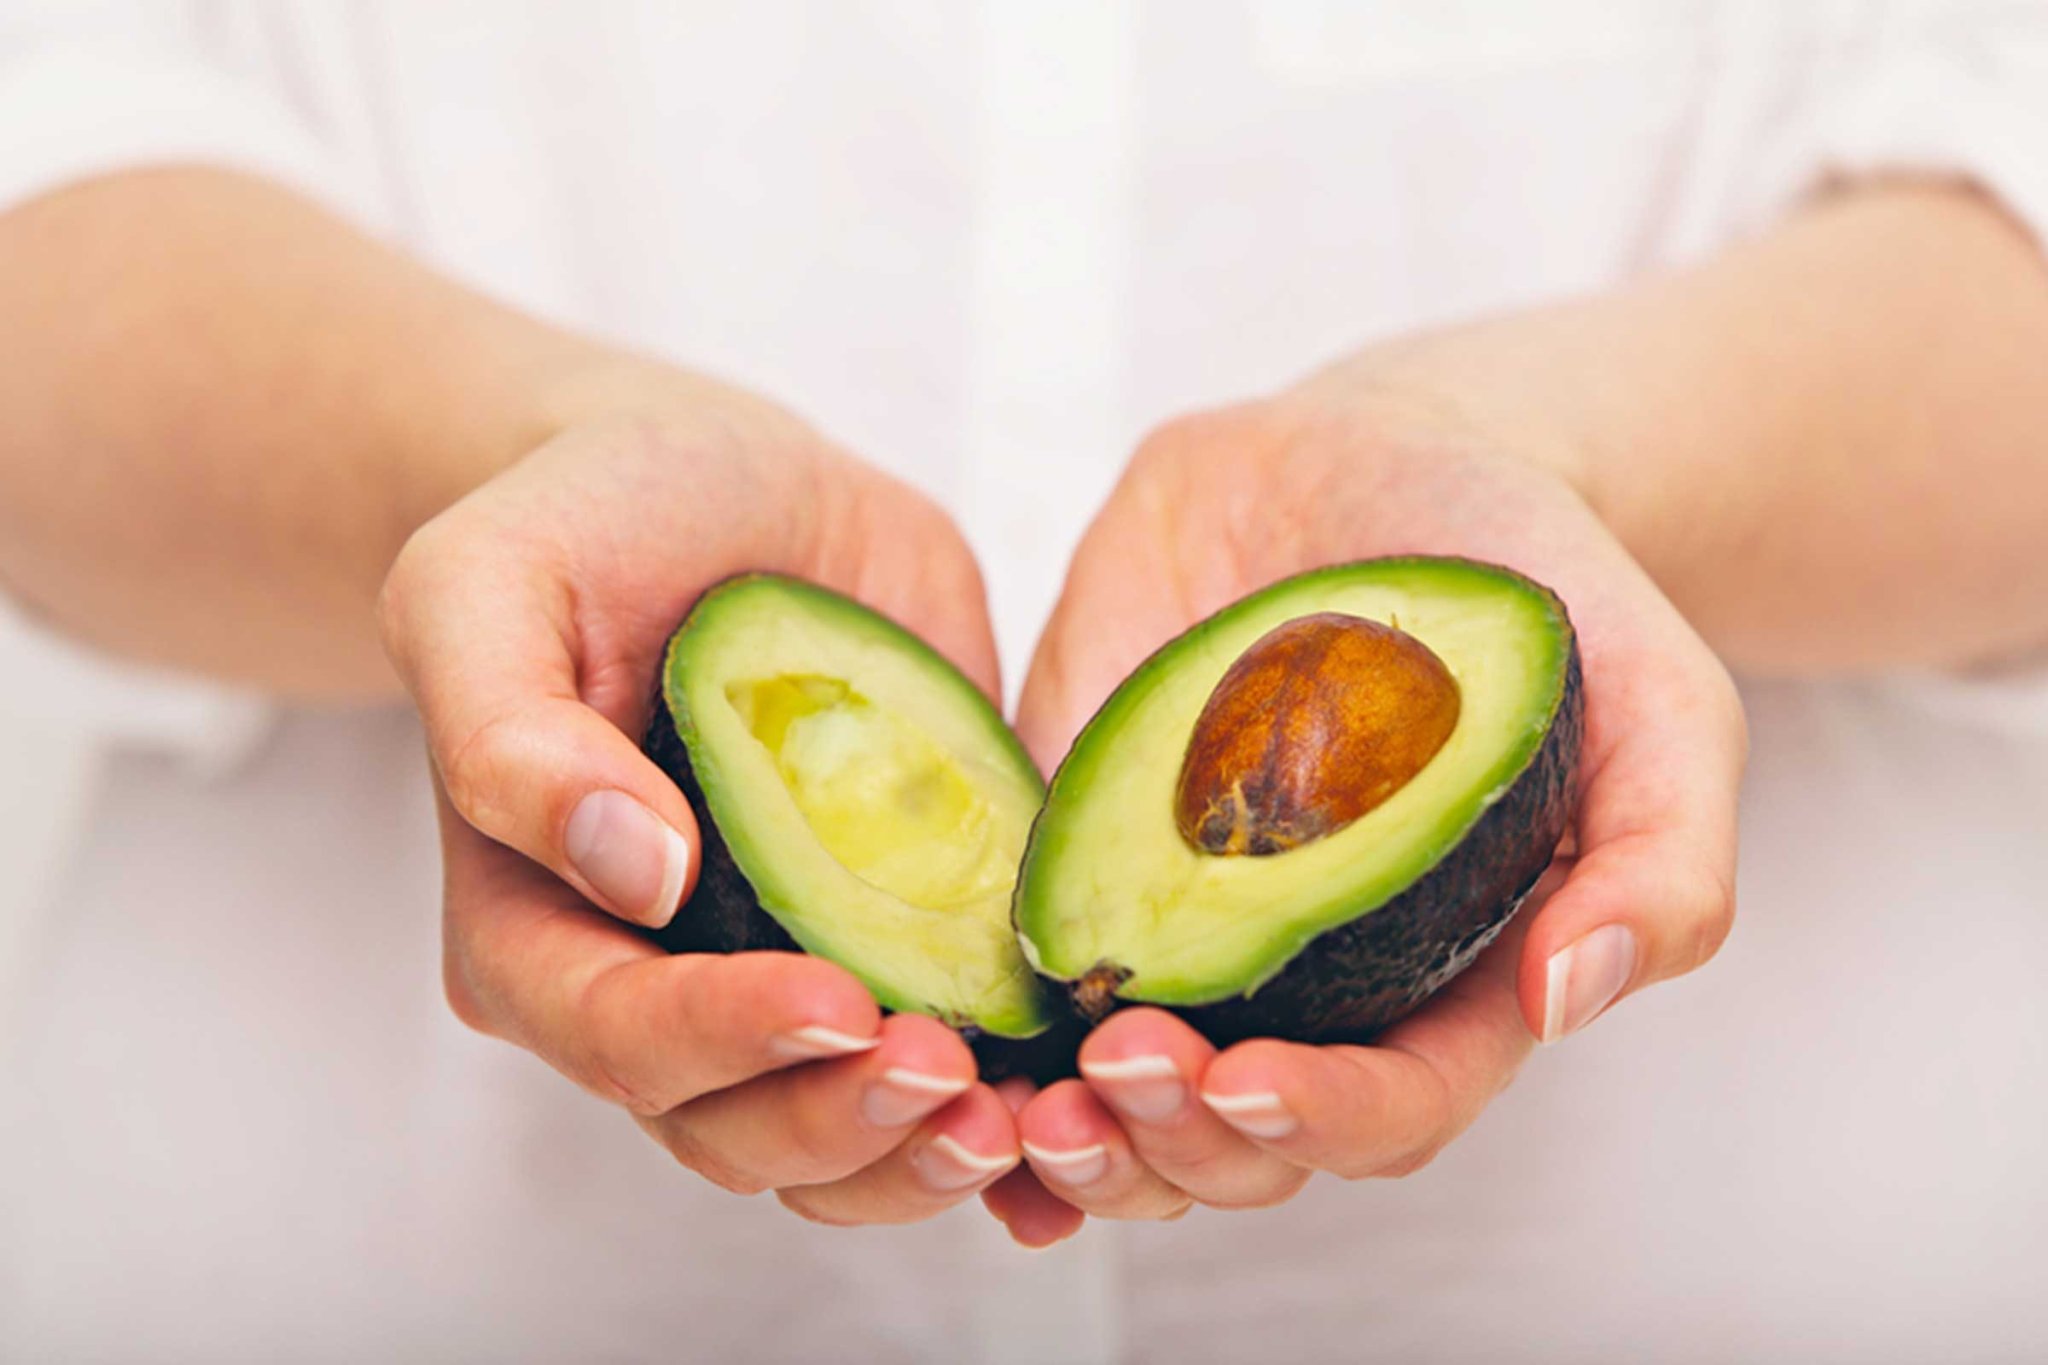 8 Easy Ways Avocado Can Make Your Hair, Skin, and Nails Just Gorgeous